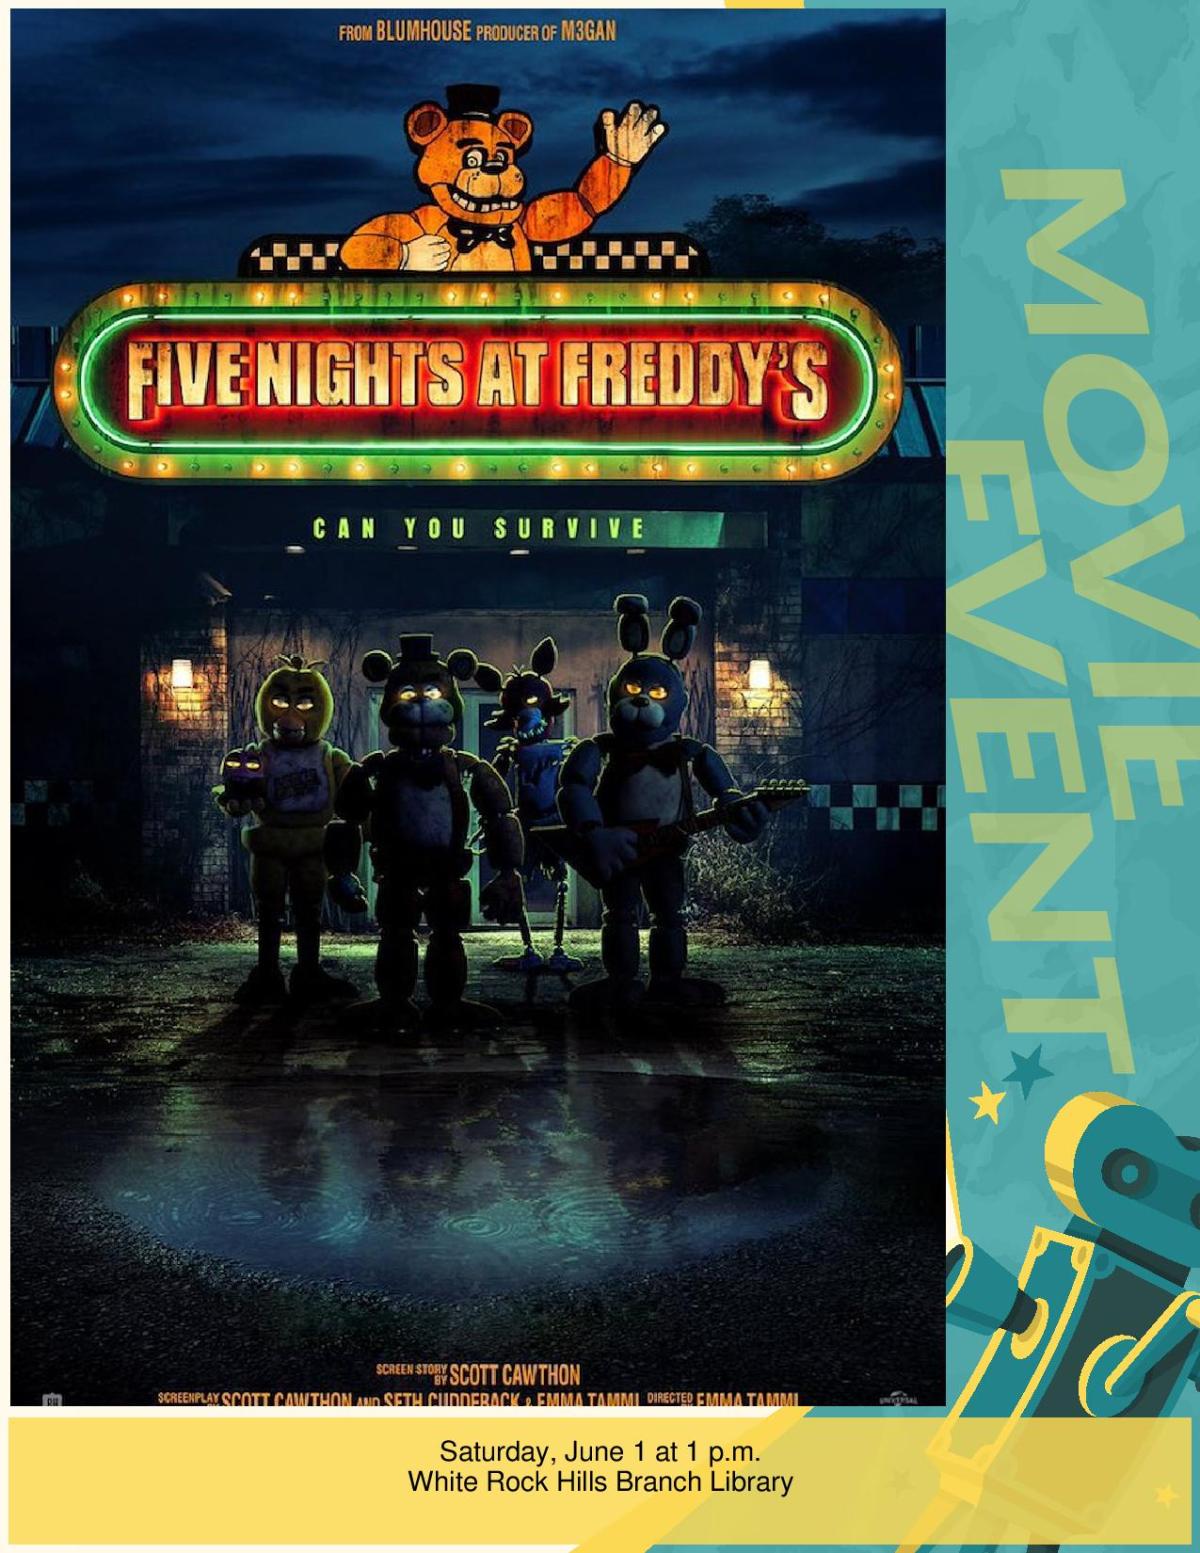 five nights at freddy's summer movie matinee. june 1 at 1 p.m. at the white rock hills branch library